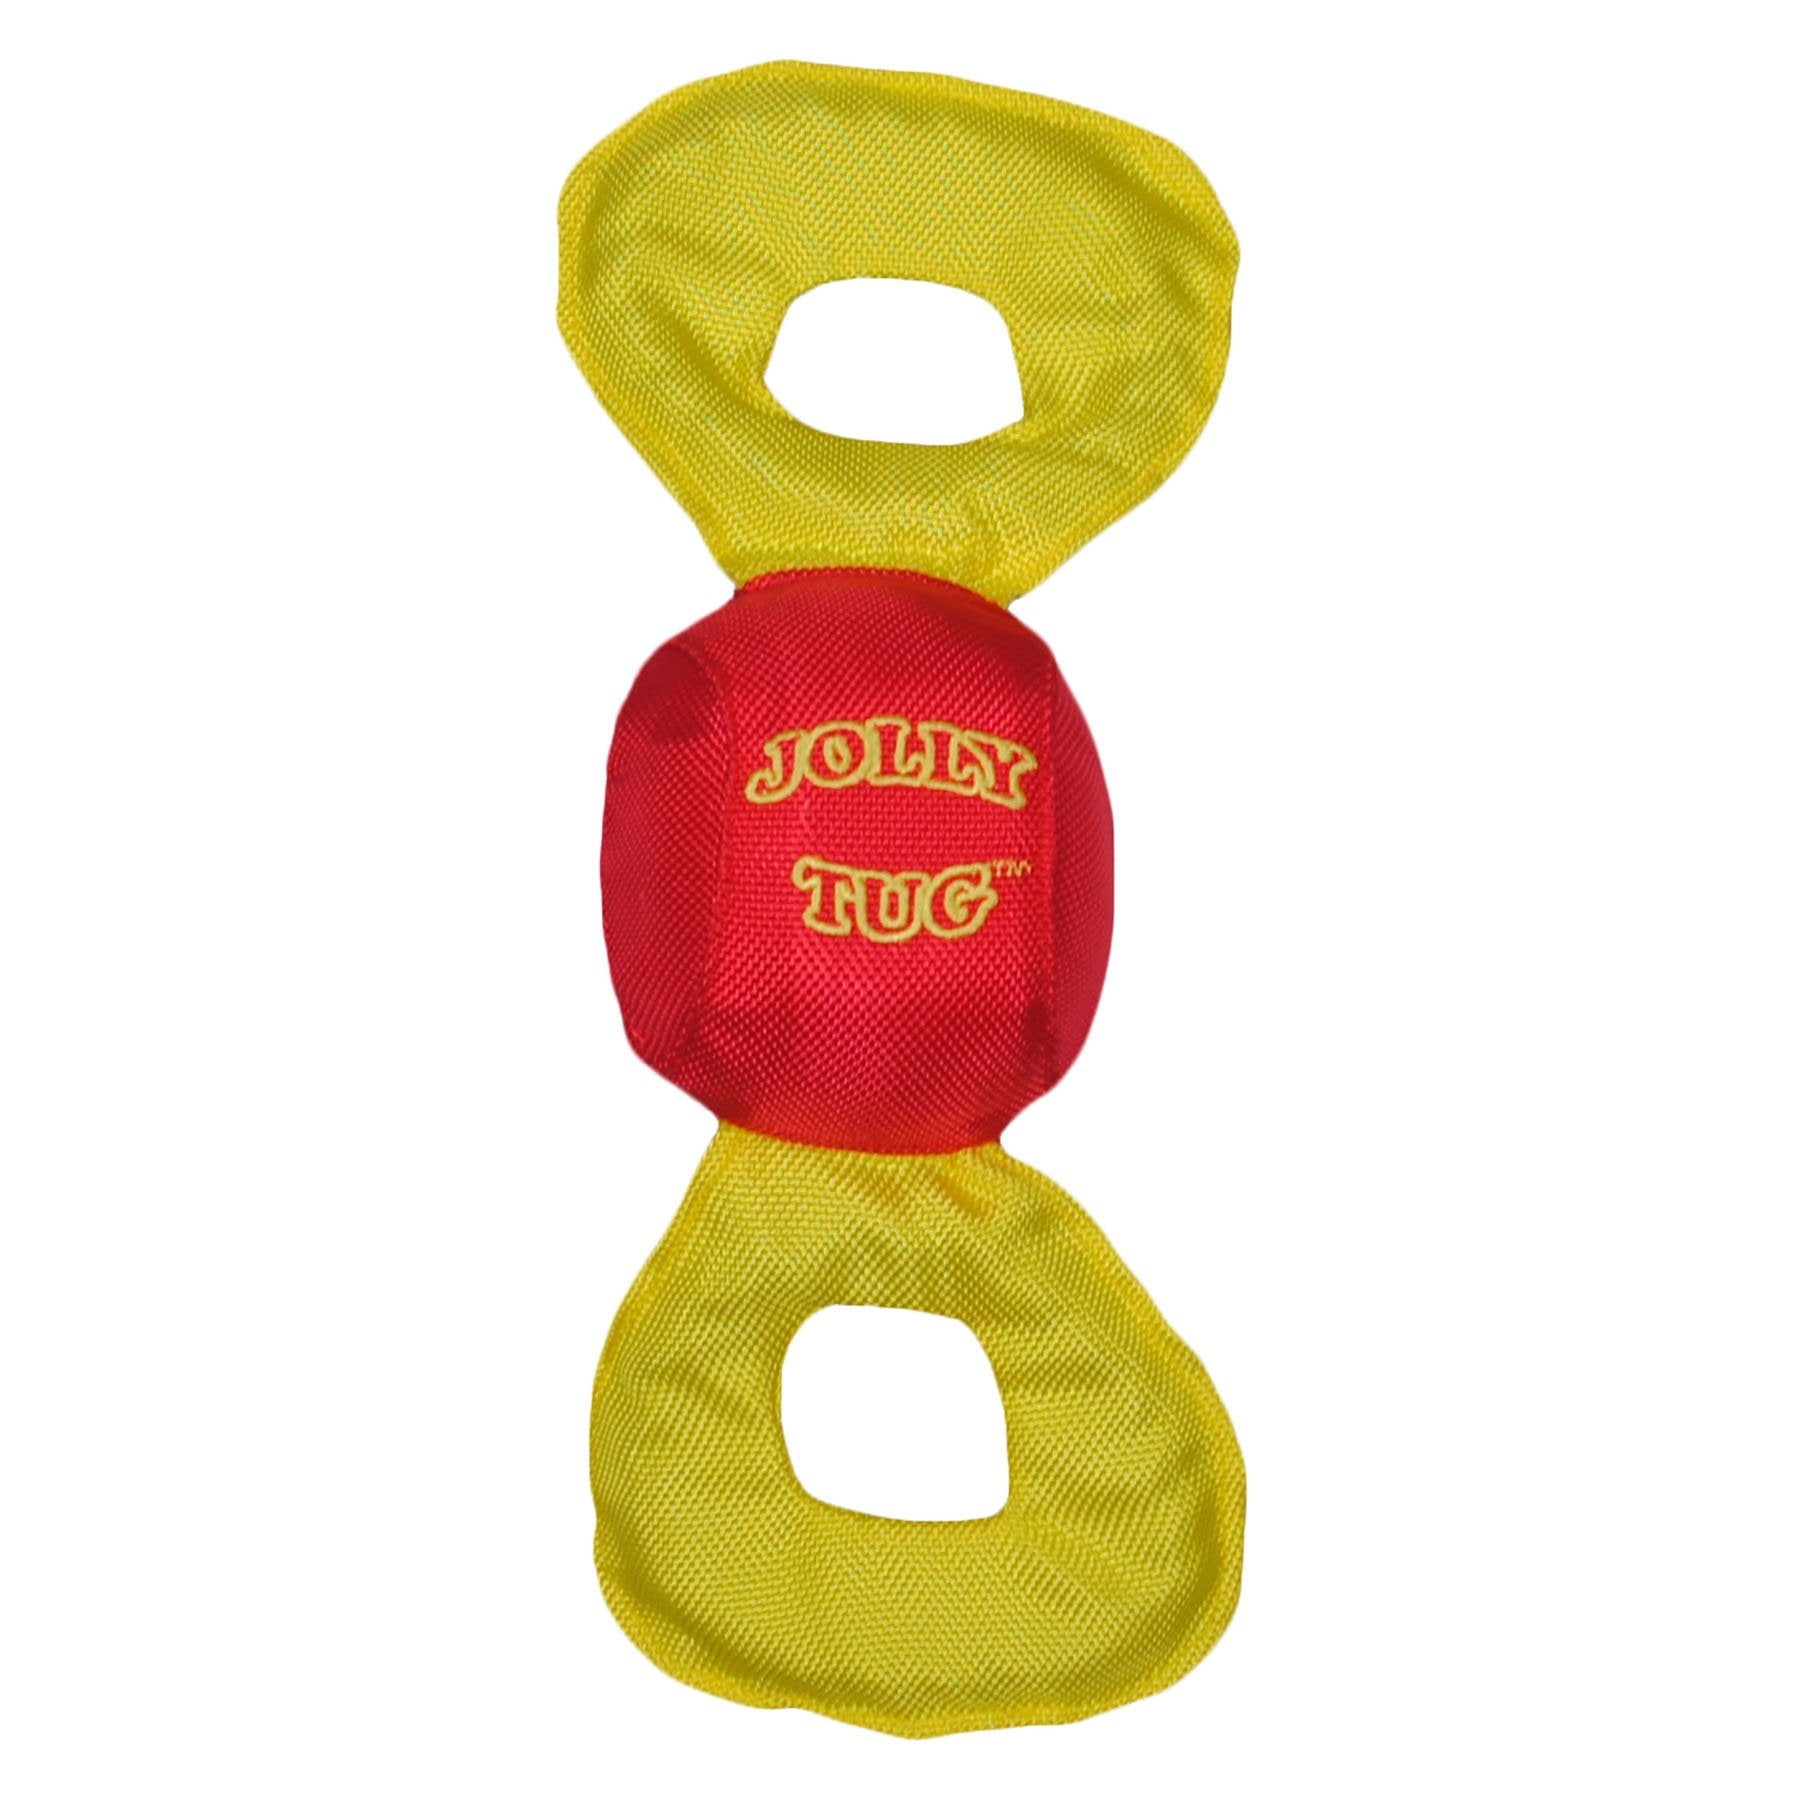 Jolly Pet Jolly Tuff Topple Dog Canine Toy Treat Reward Thick Rubber